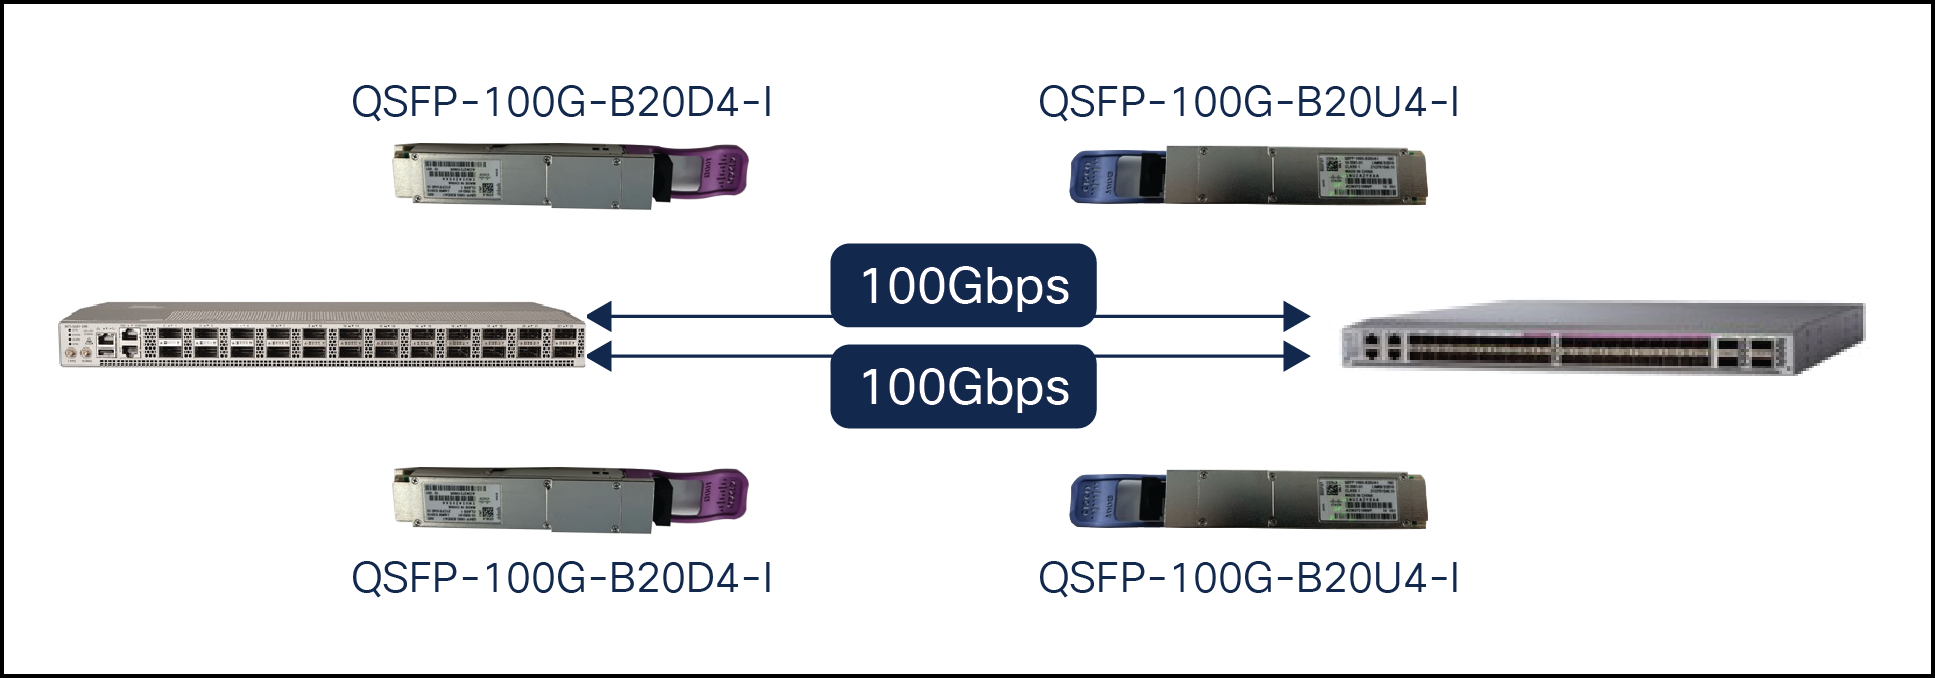 200Gbps using two pairs of QSFP-100G-B20U4-I and QSFP-100G-B20D4-I on a pair of SMF